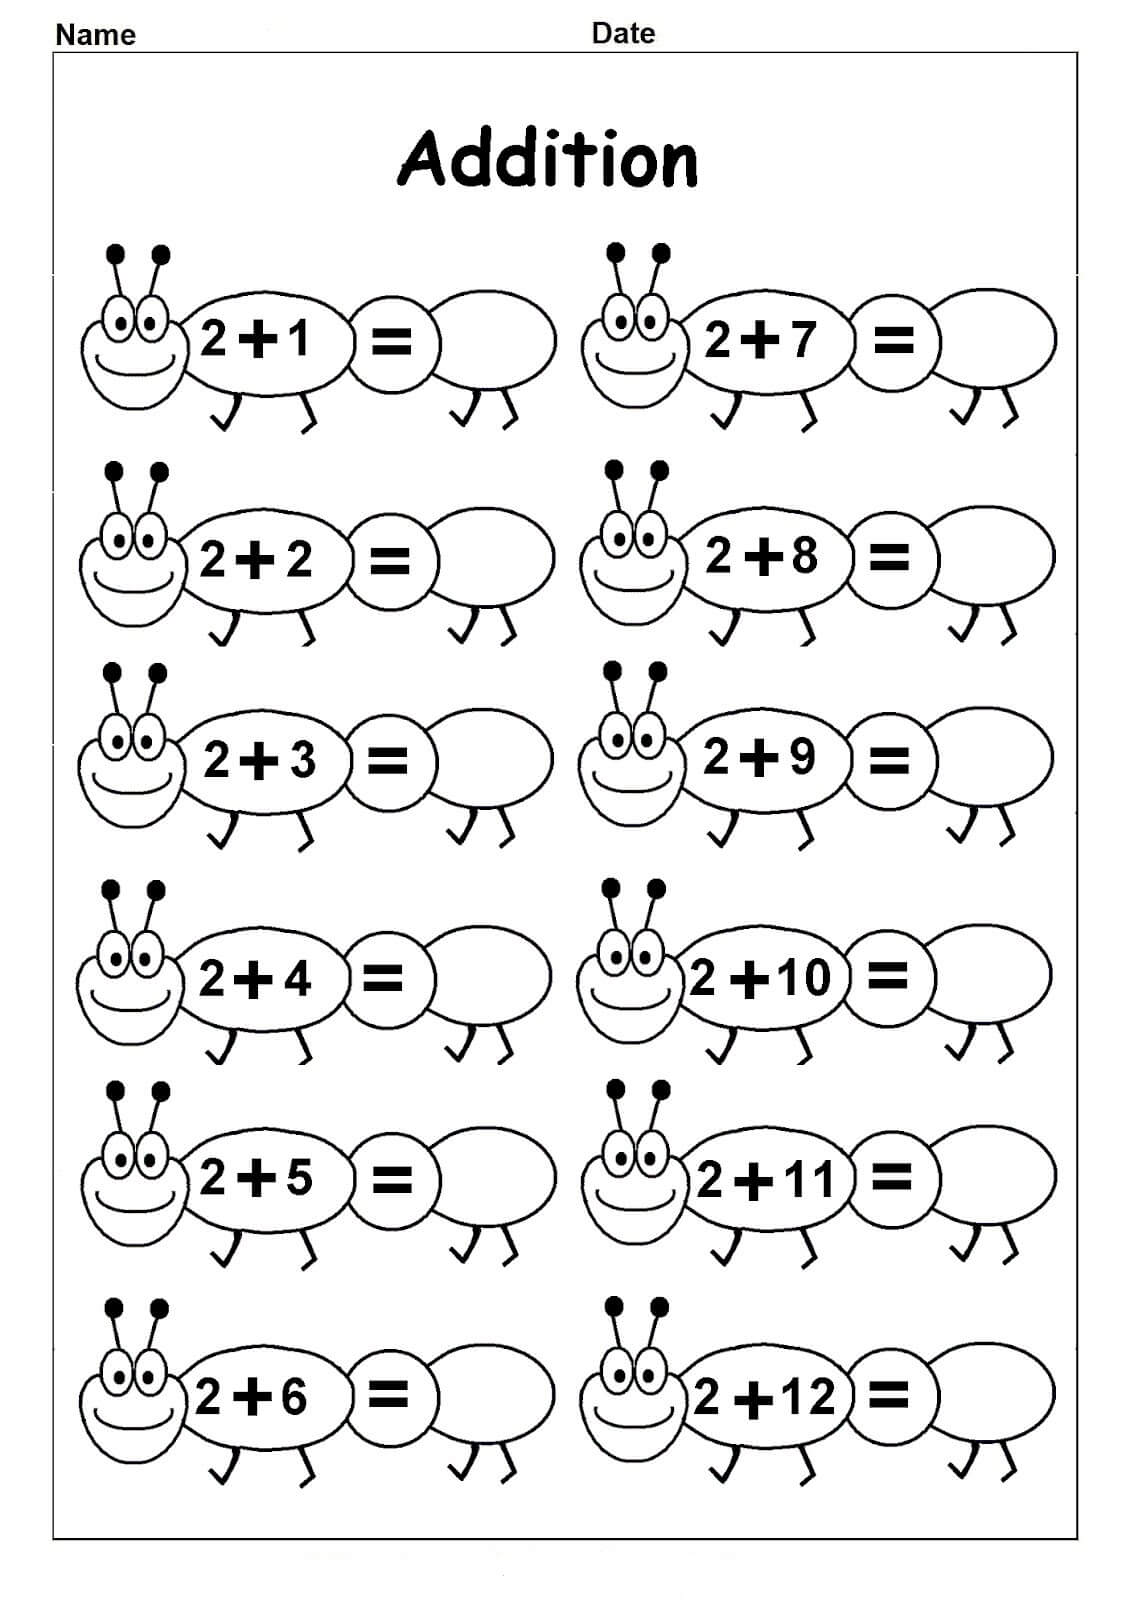 Kindergarten Counting Worksheets Sequencing To 25 Counting Kindergarten Numbers To 20